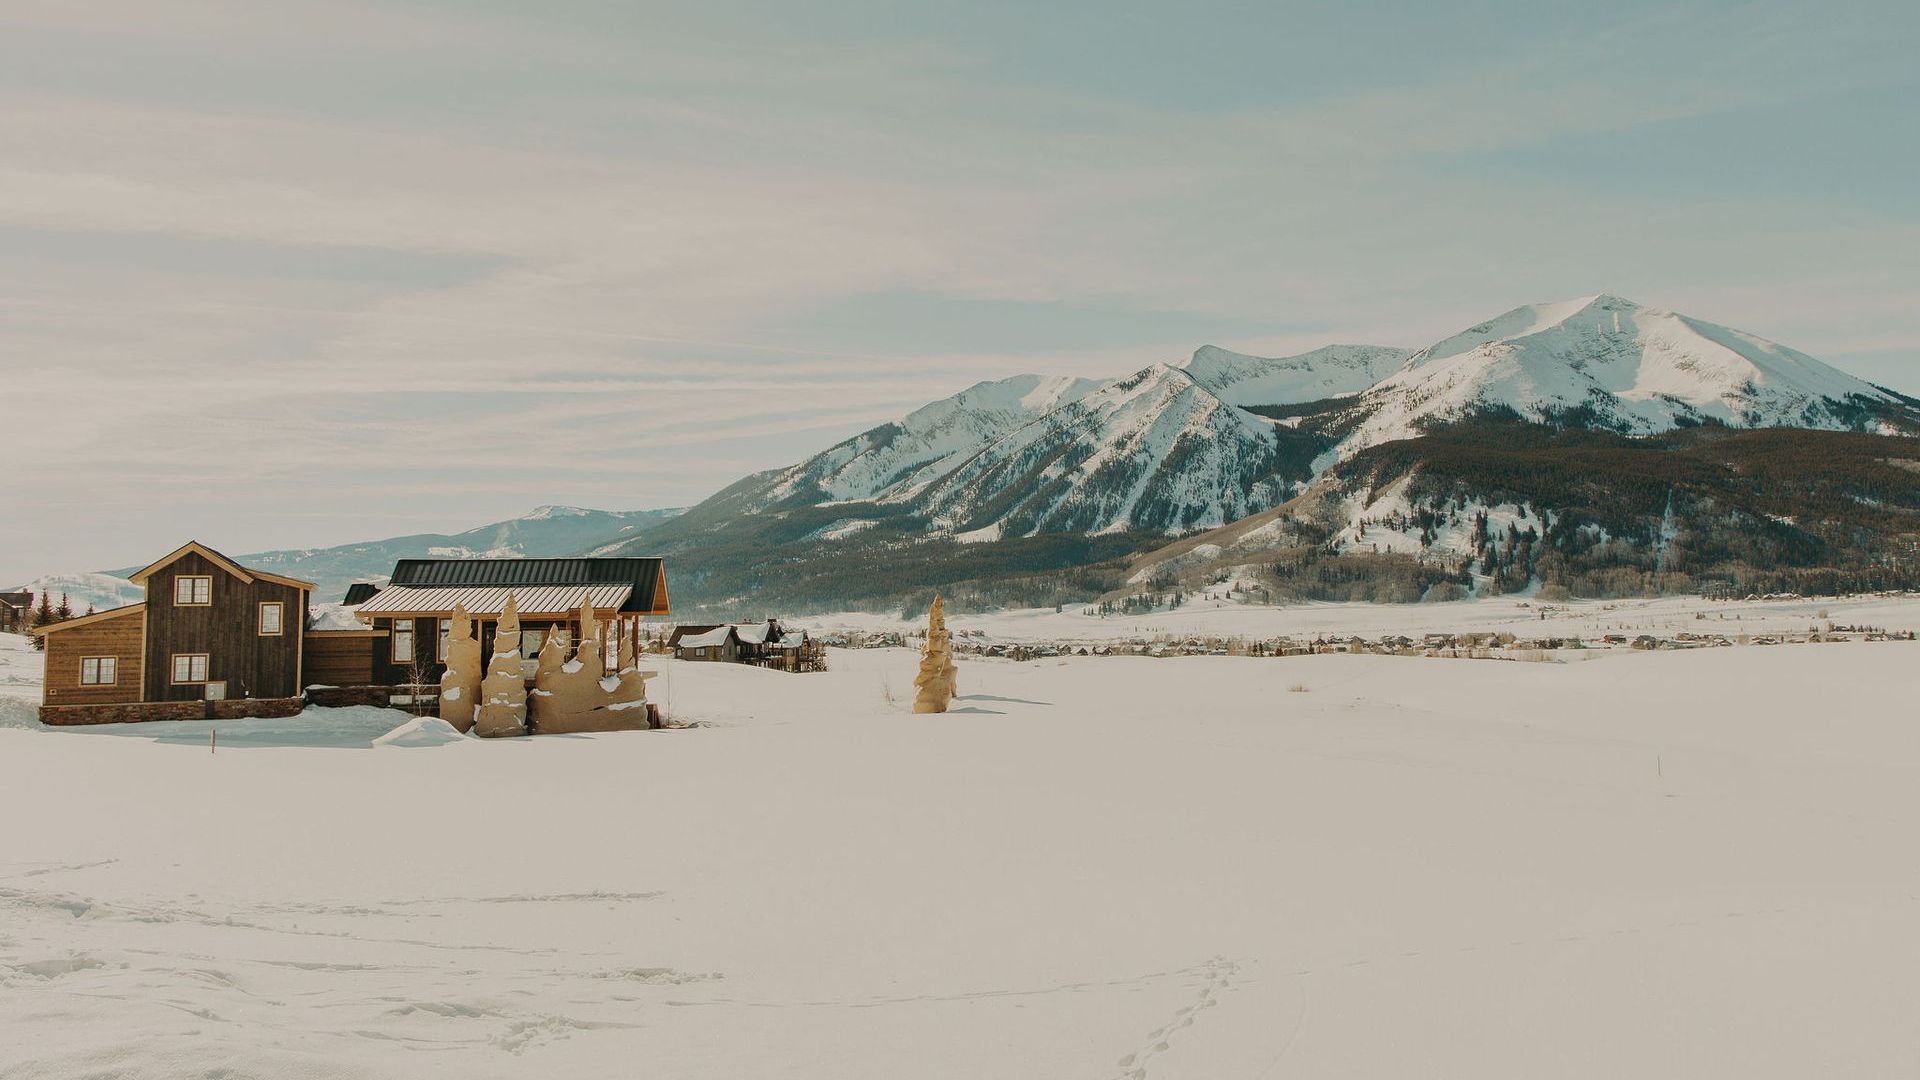 A couple of houses are sitting in the middle of a snow covered field with mountains in the background.